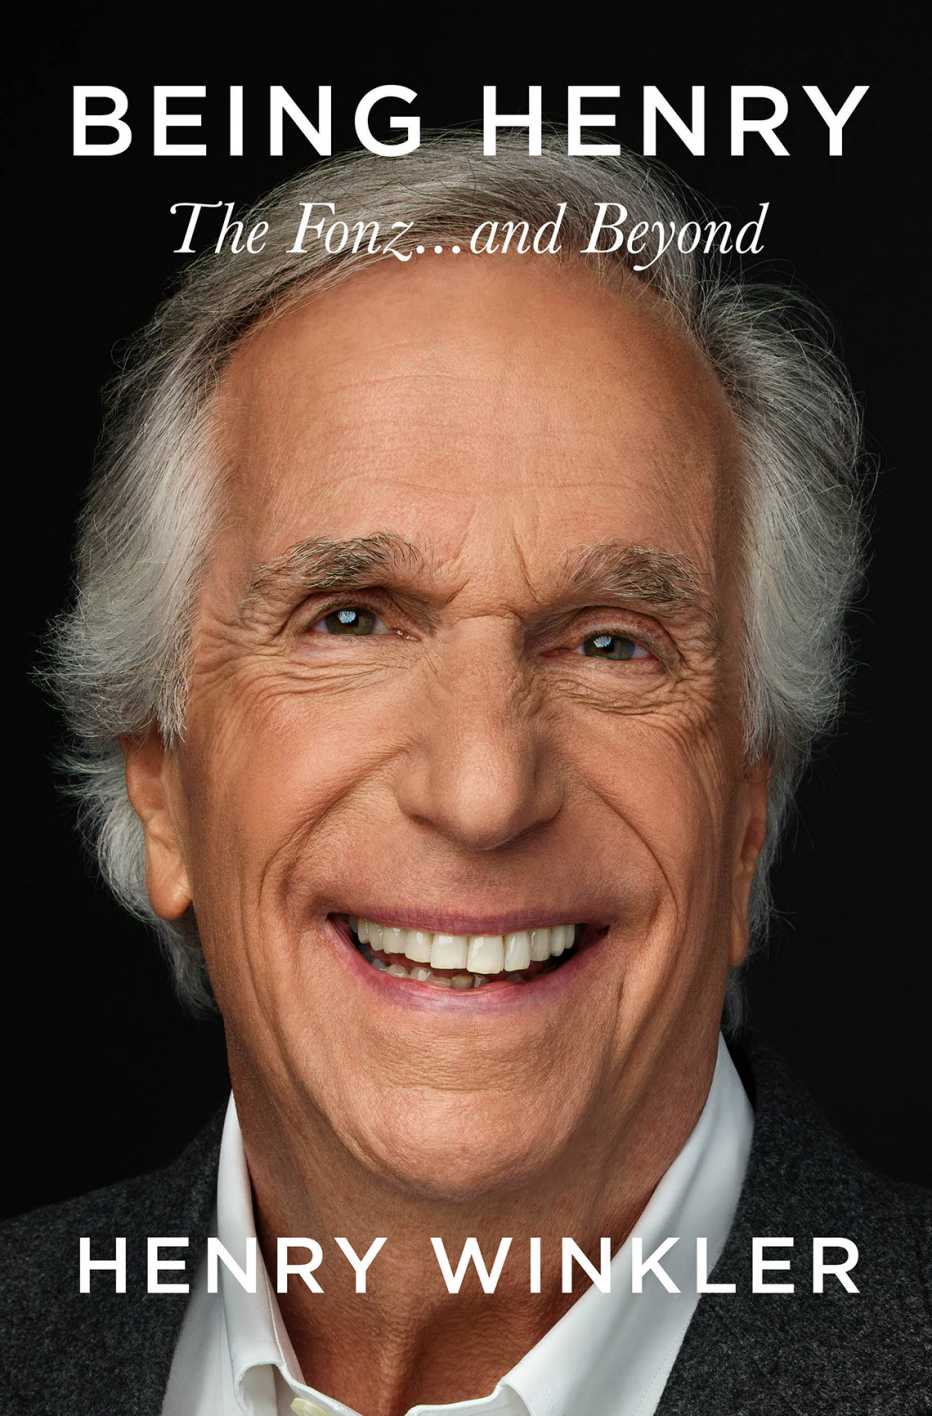 the book cover for henry winkler's being henry the fonz and beyond